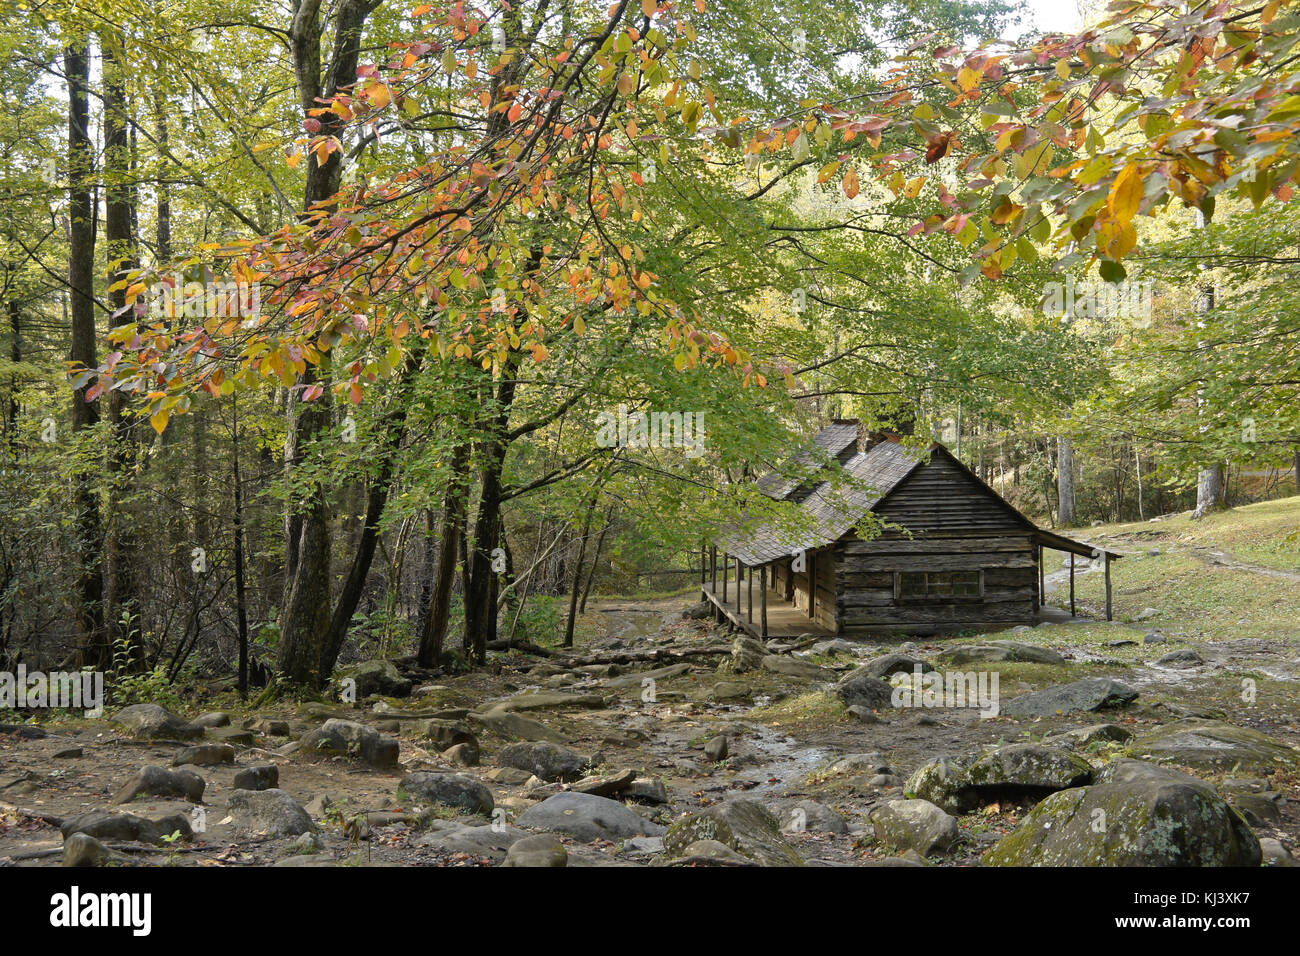 Autumn foliage and log cabin at the Noah 'Bud' Ogle Place, Roaring Fork Motor Nature Trail, Great Smoky Mountains National Park, Tennessee Stock Photo